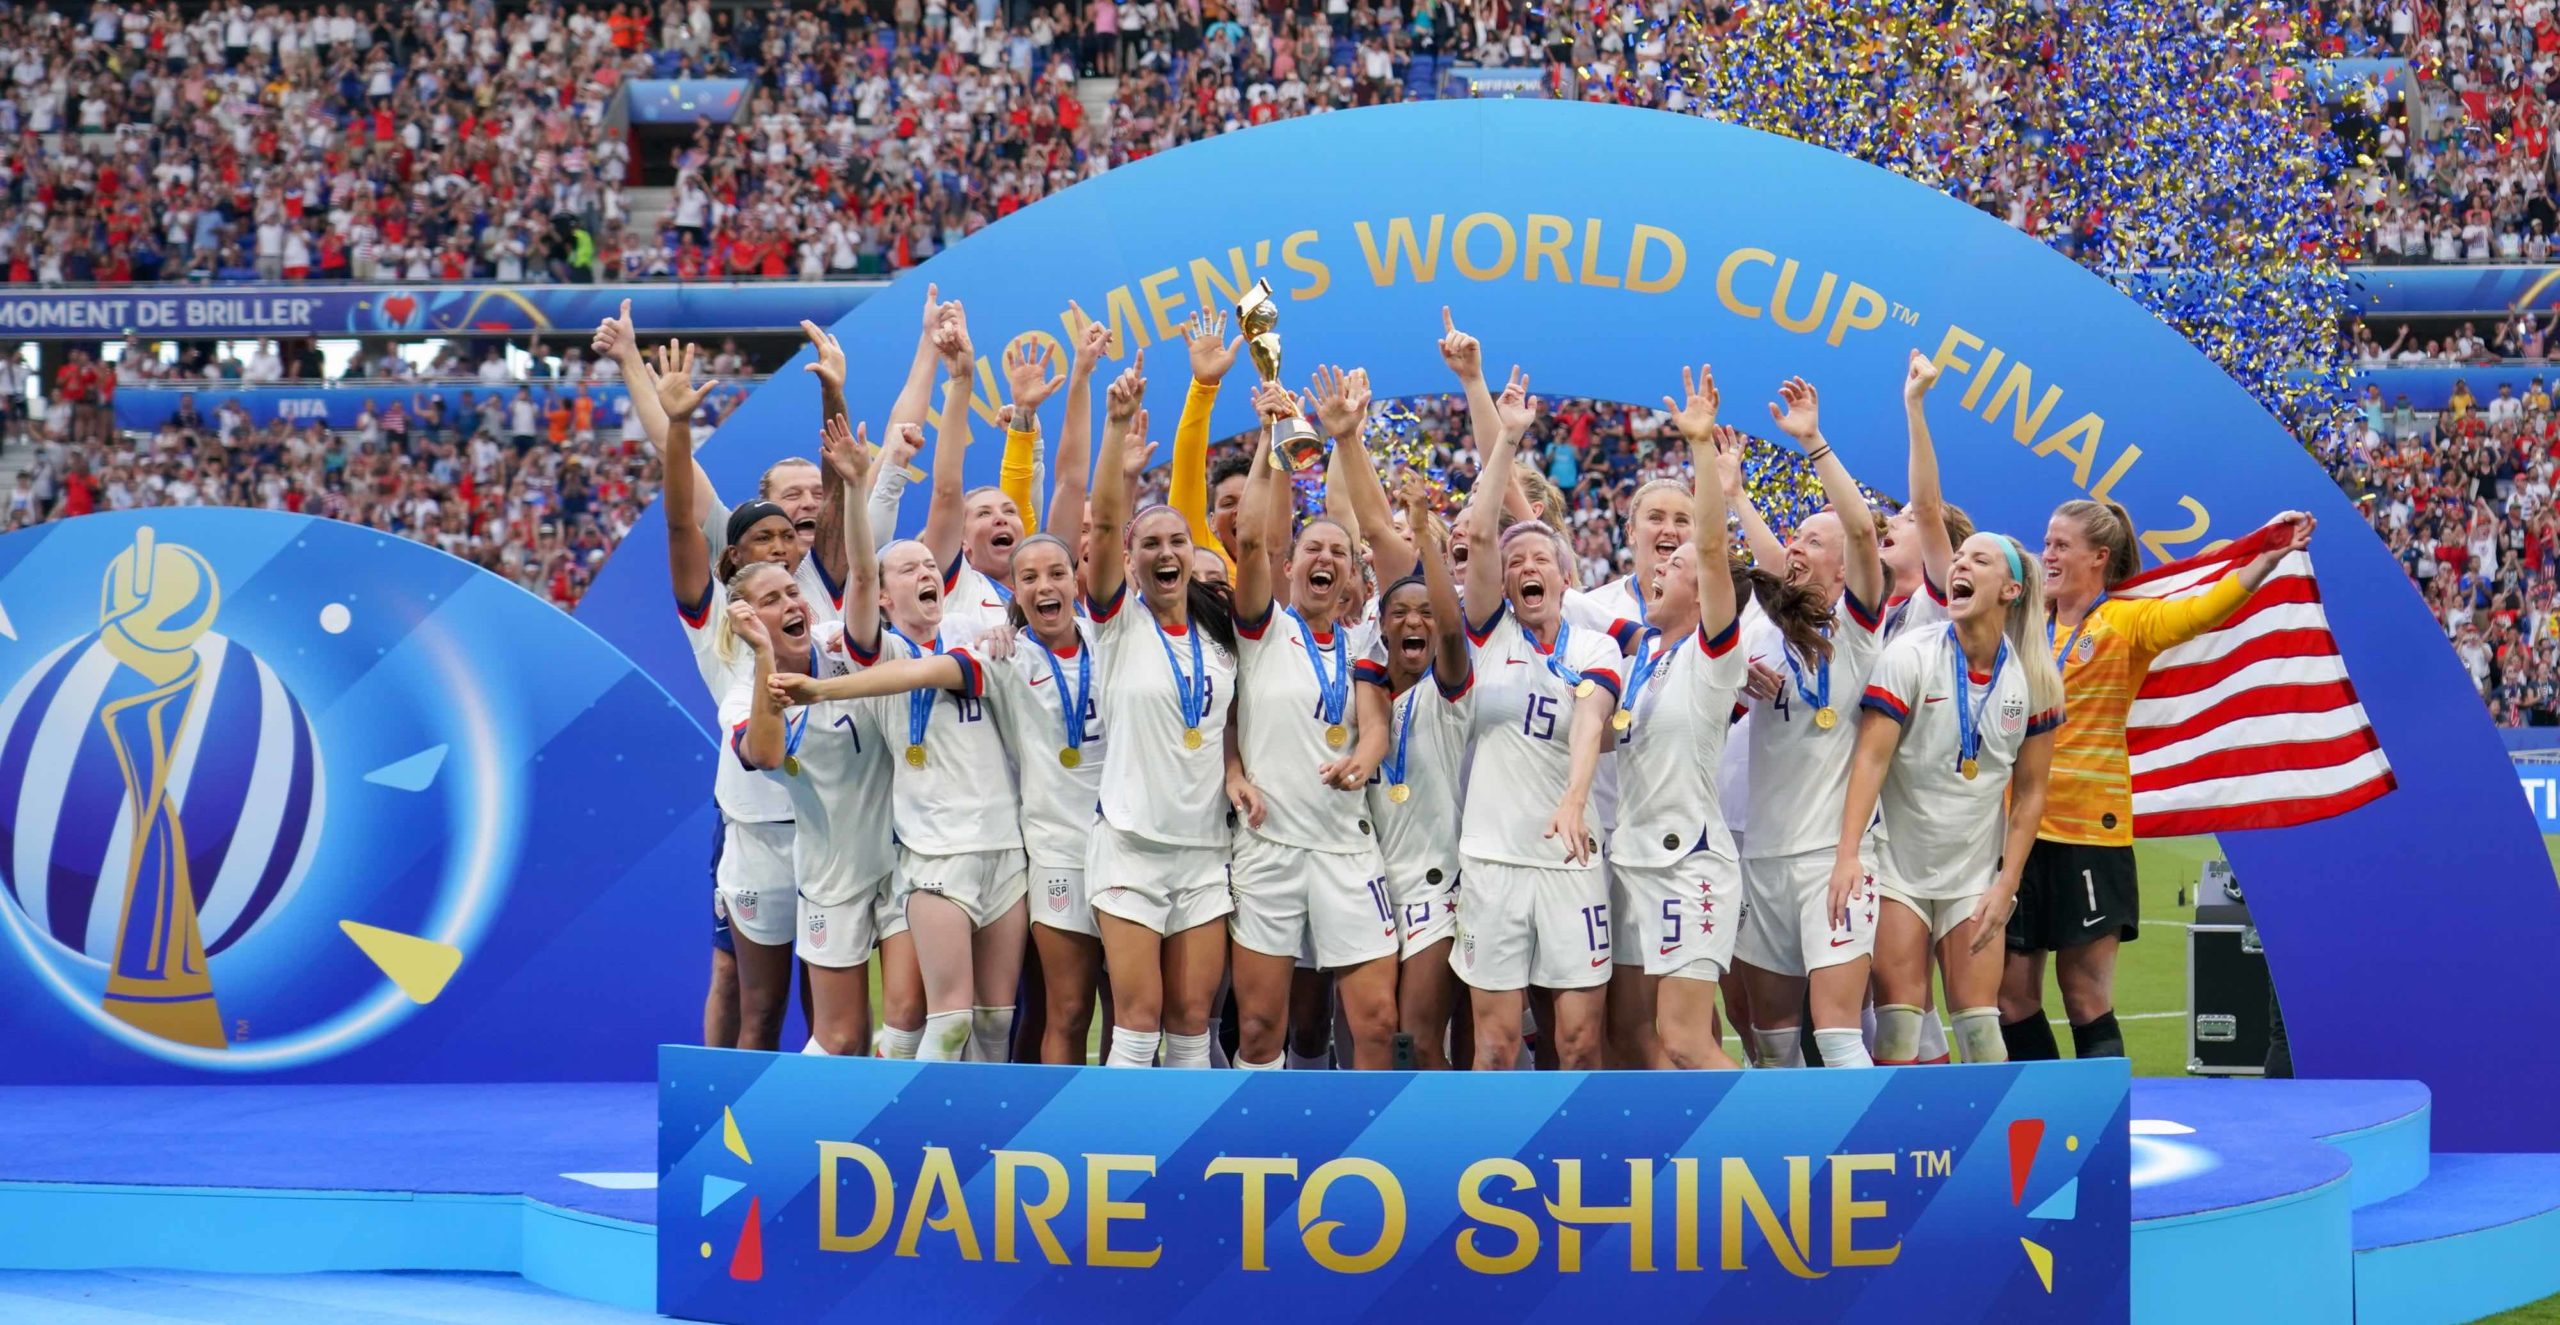 Final two matches for USWNT World Cup Victory Tour confirmed